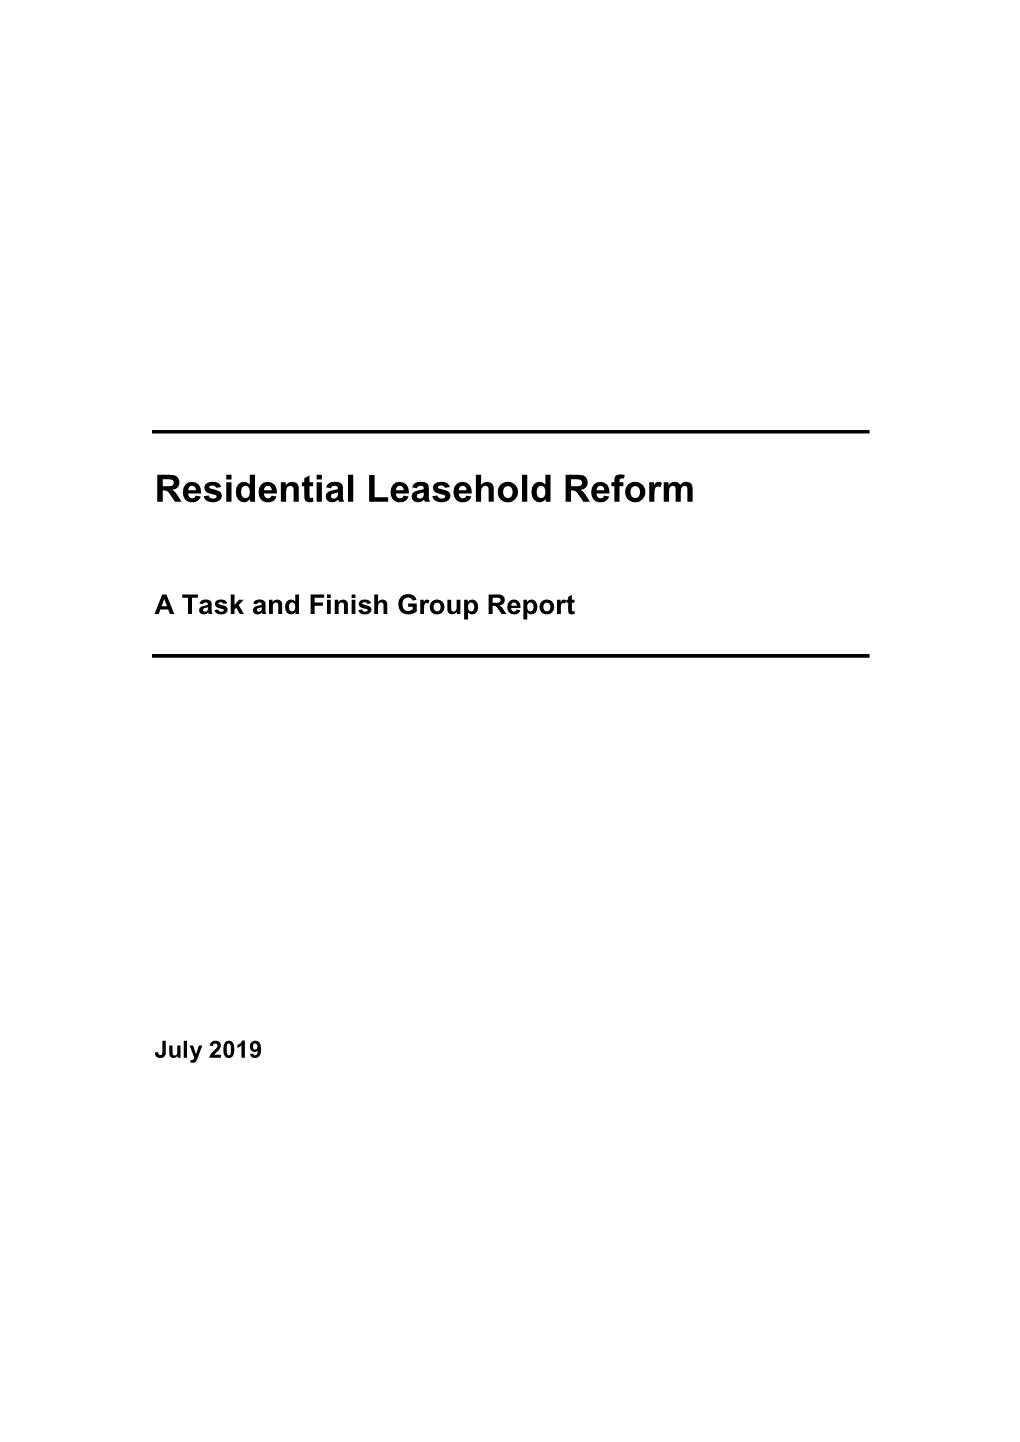 Residential Leasehold Reform: a Task and Finish Group Report